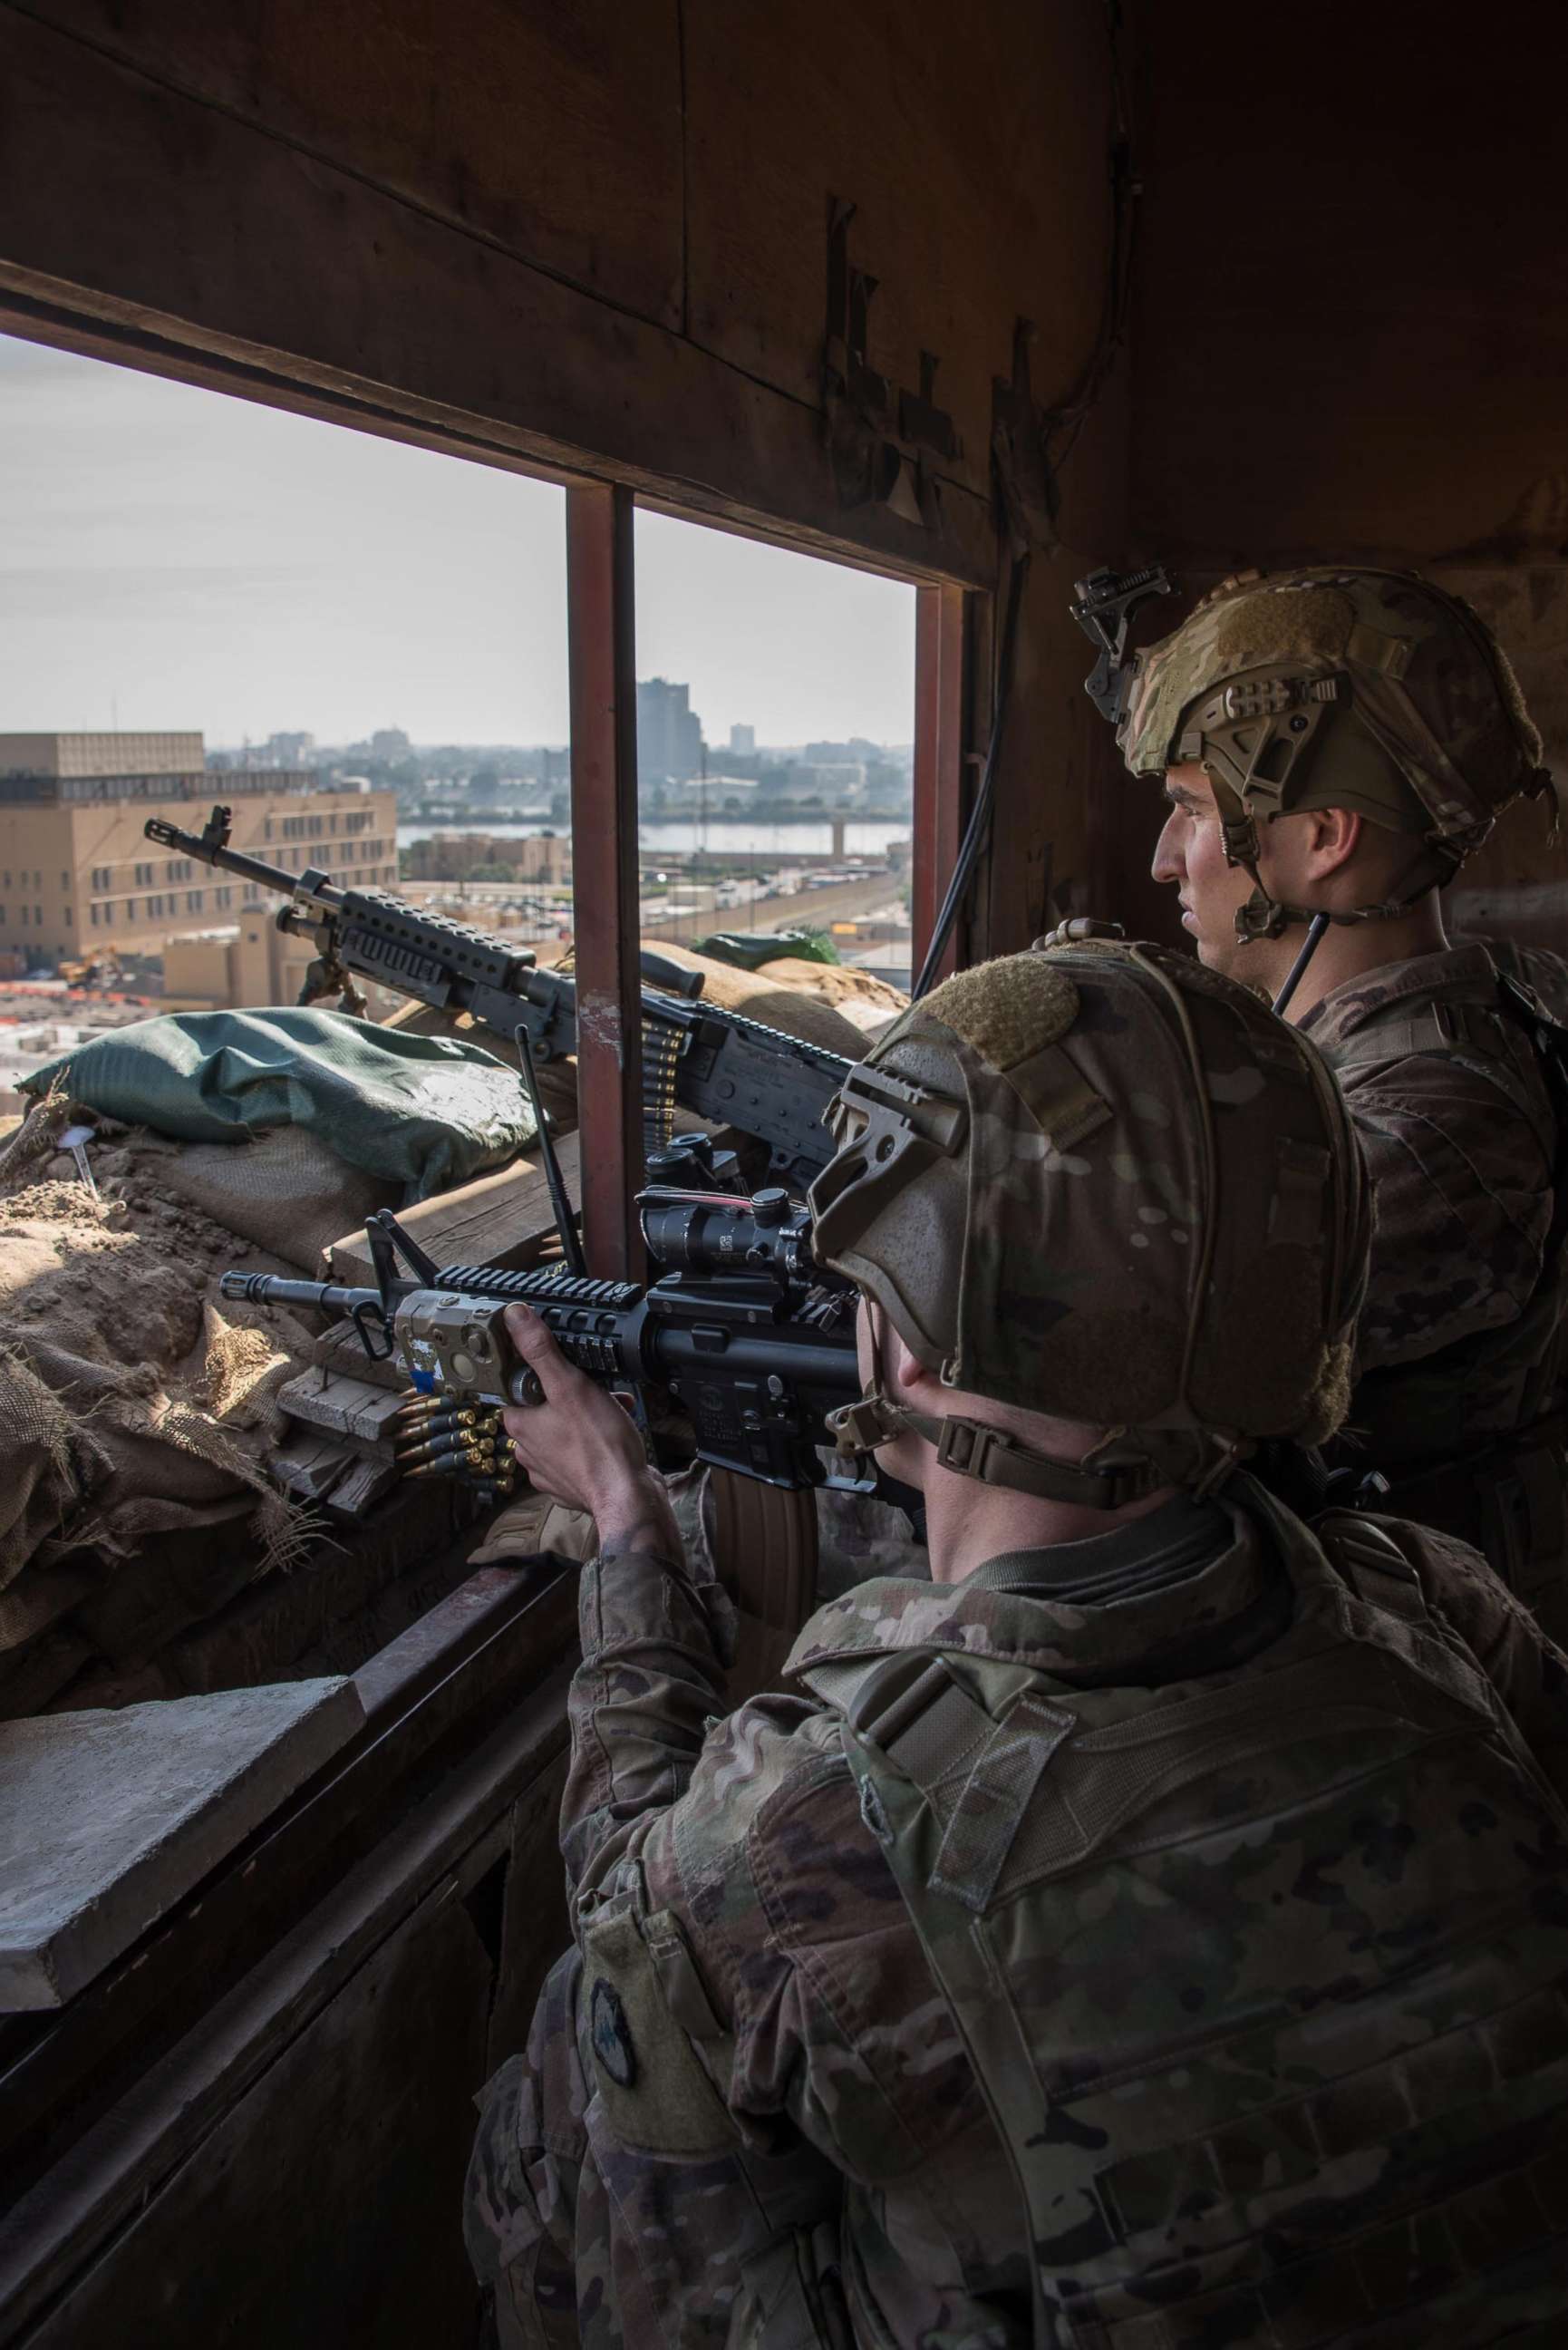 PHOTO: U.S. Army Soldiers maintain overwatch at the U.S. Embassy Compound in Baghdad, Iraq, Jan. 1, 2020.